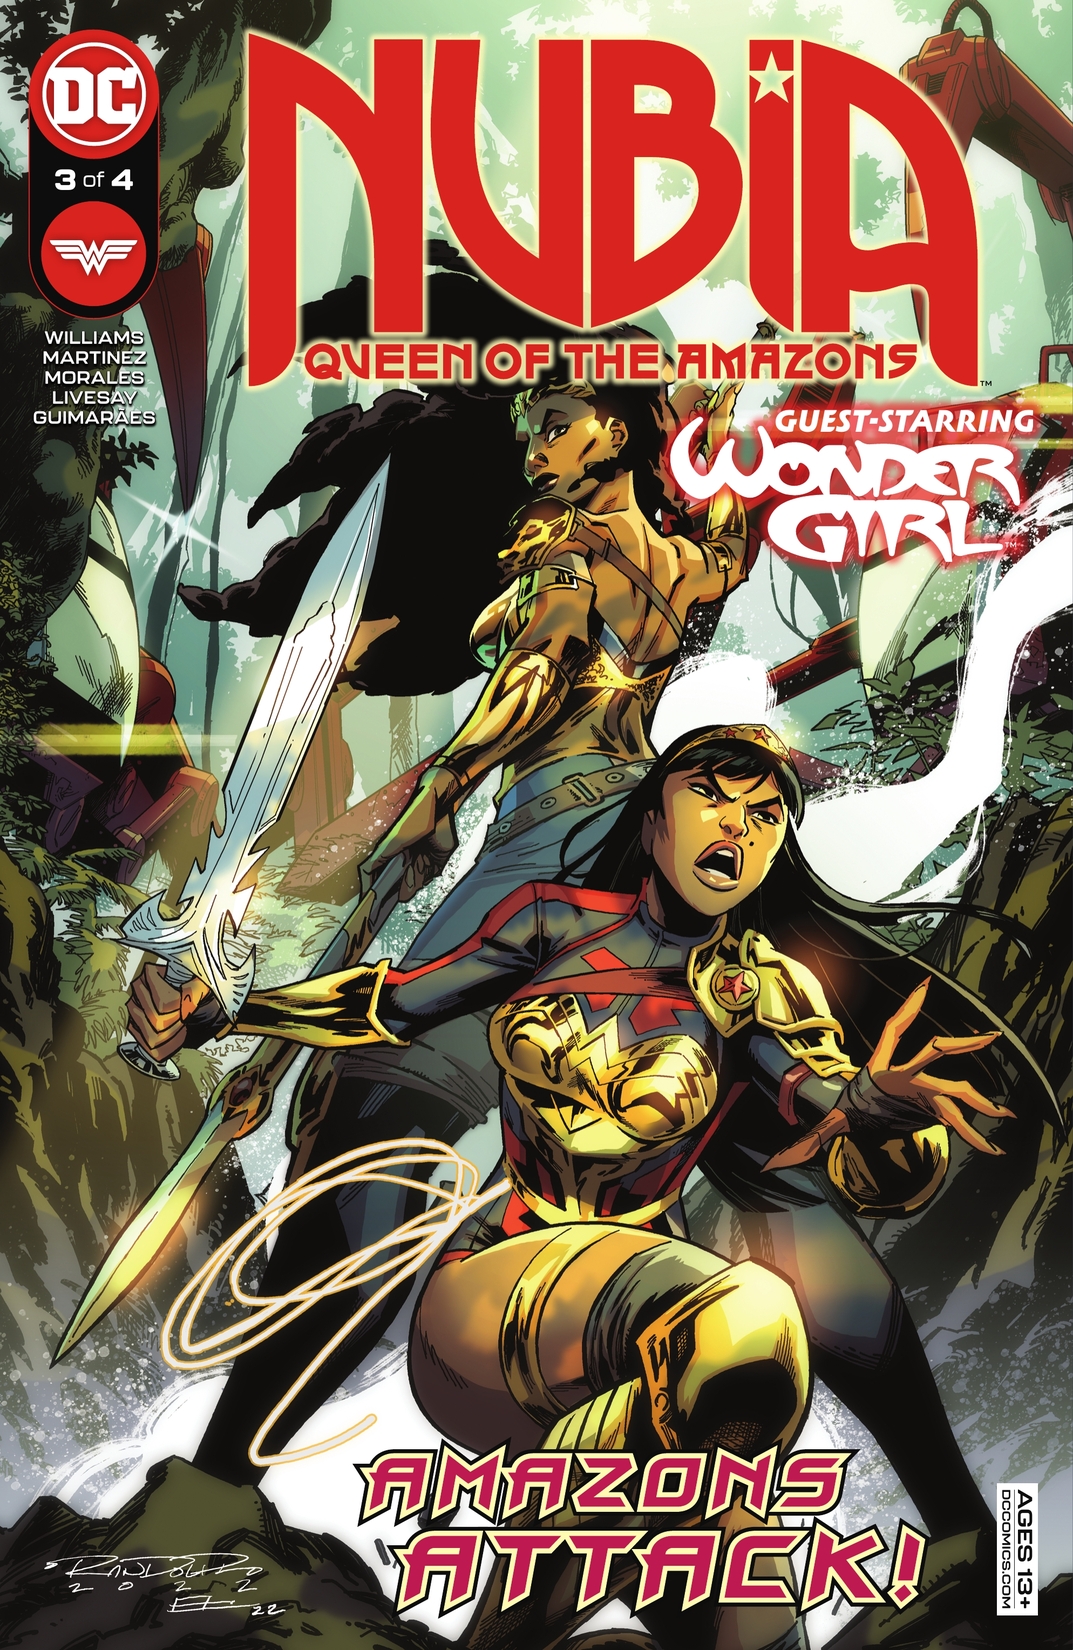 Nubia: Queen of the Amazons #3 preview images